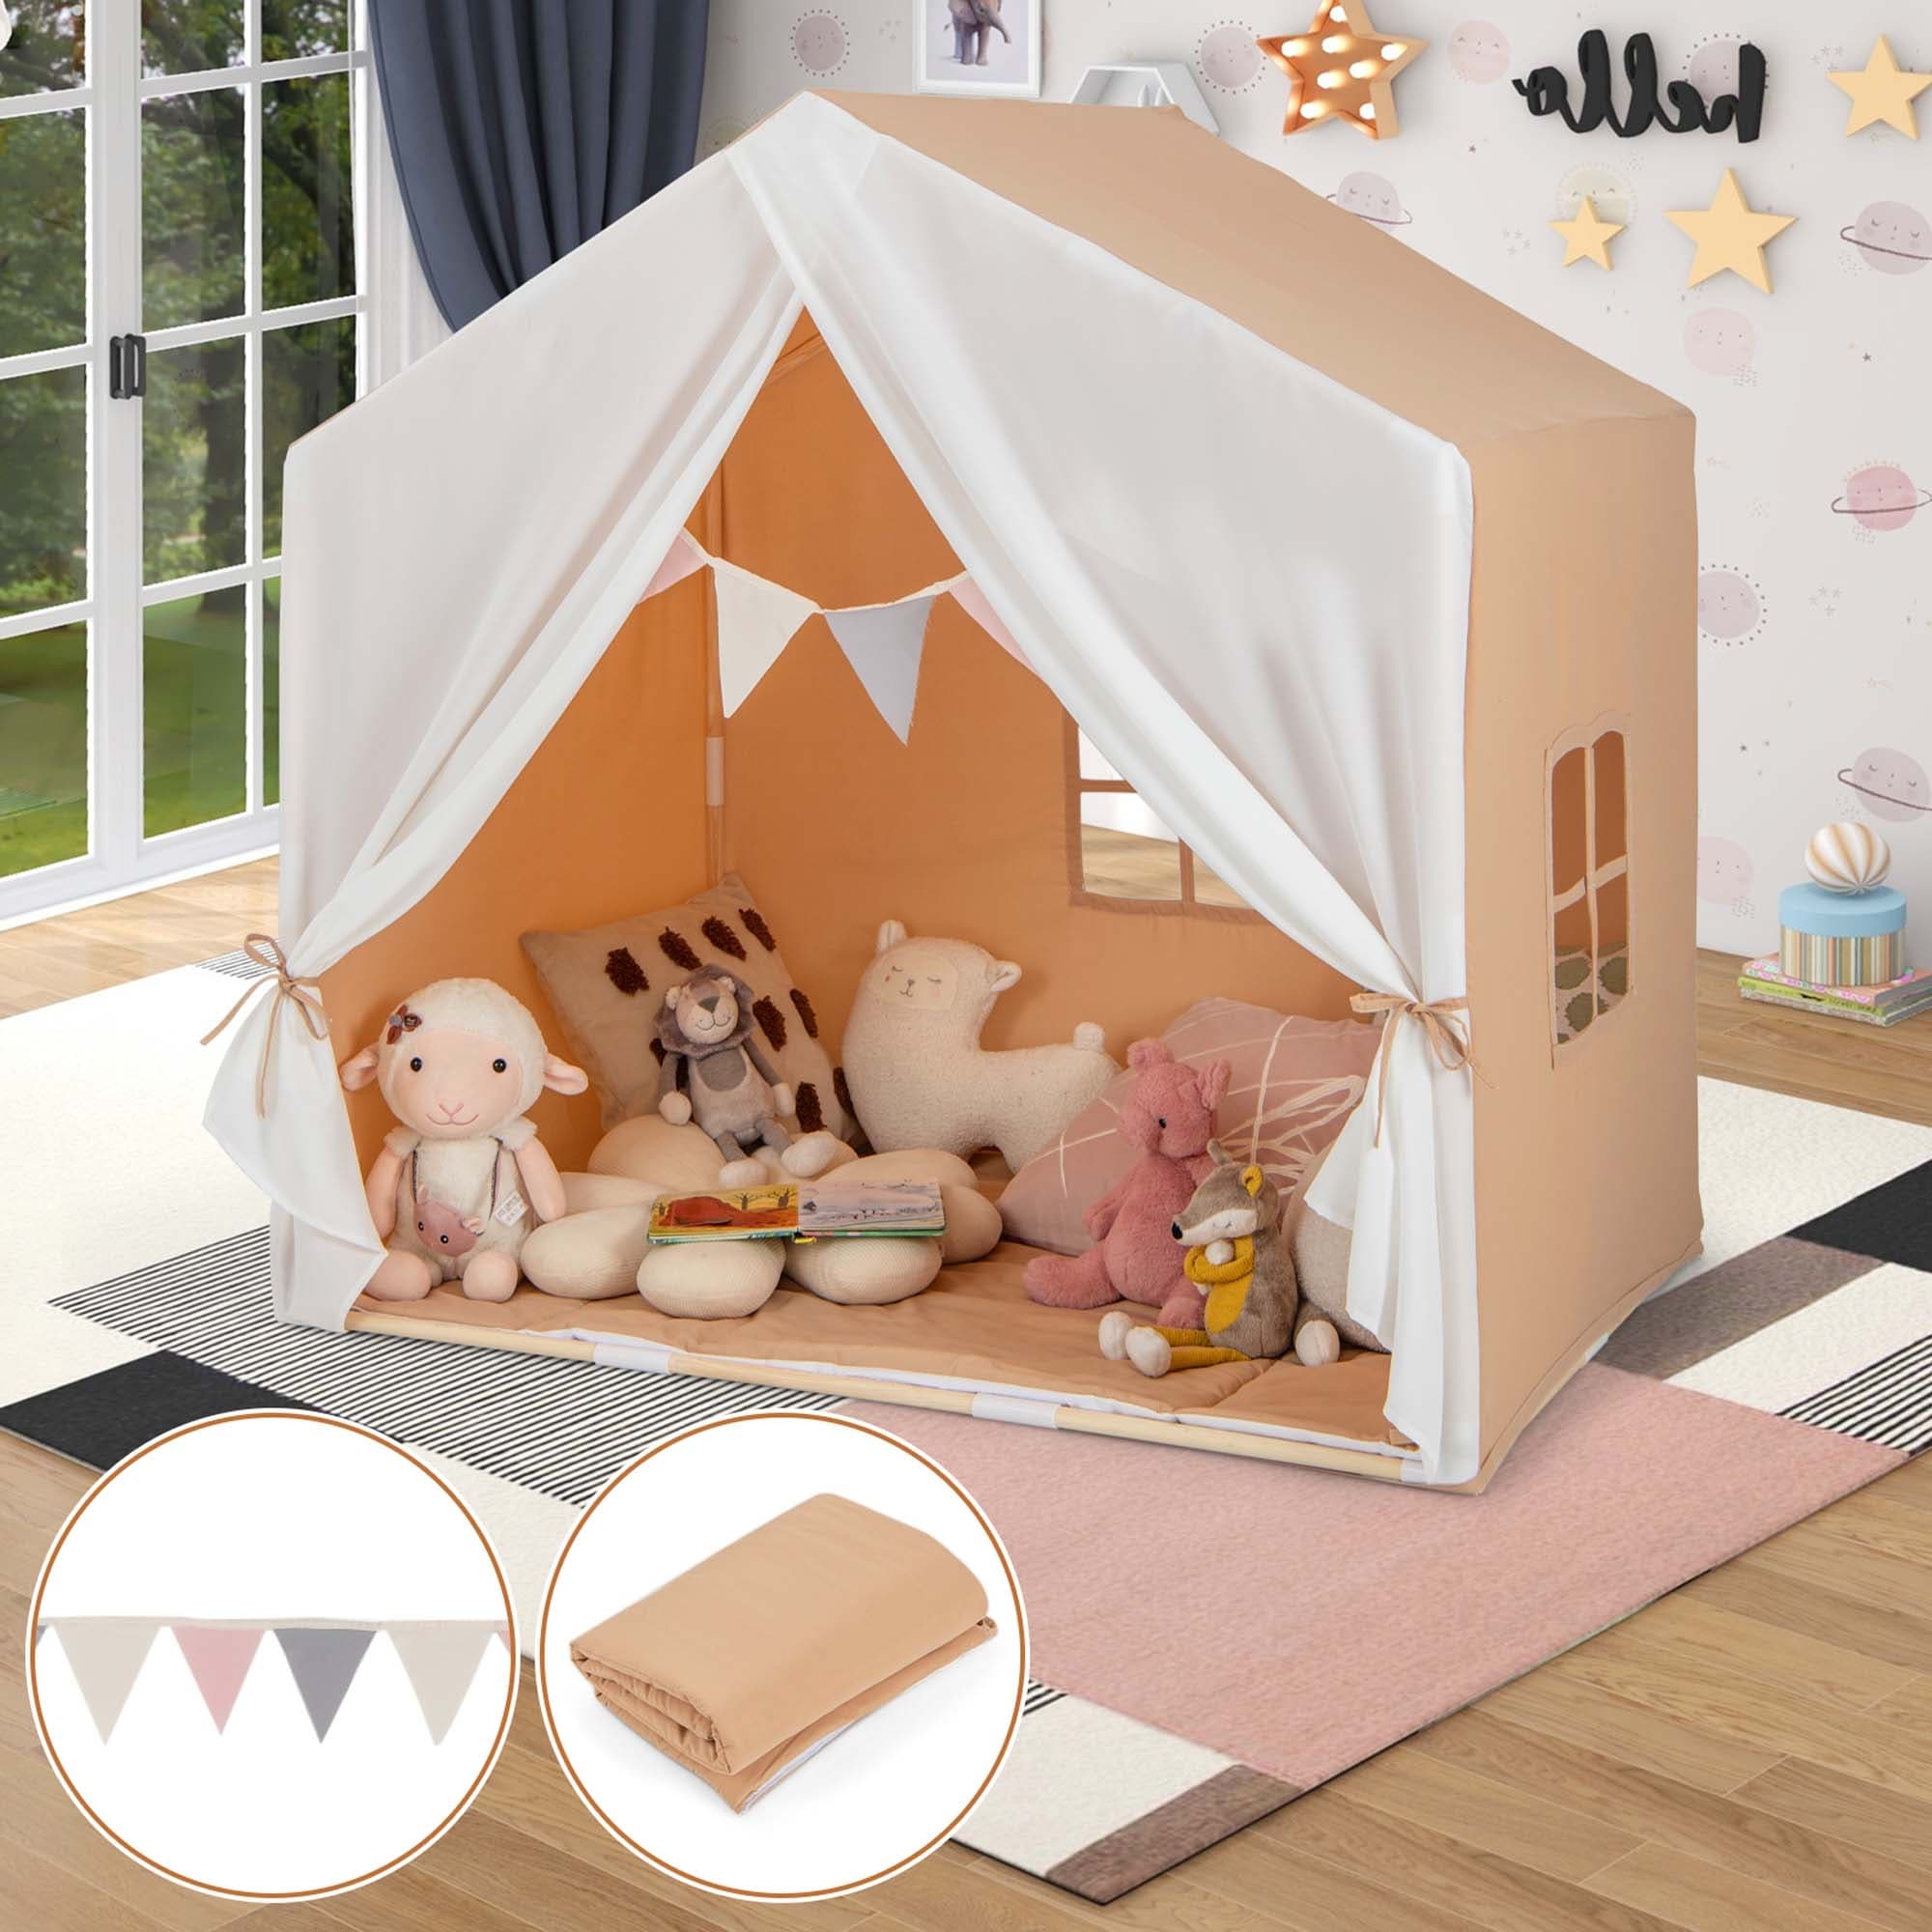  Sunny Days Entertainment Barbie Dream Camper Pop Up Play Tent  Pink Indoor Playhouse for Kids Gift for Girls : Toys & Games